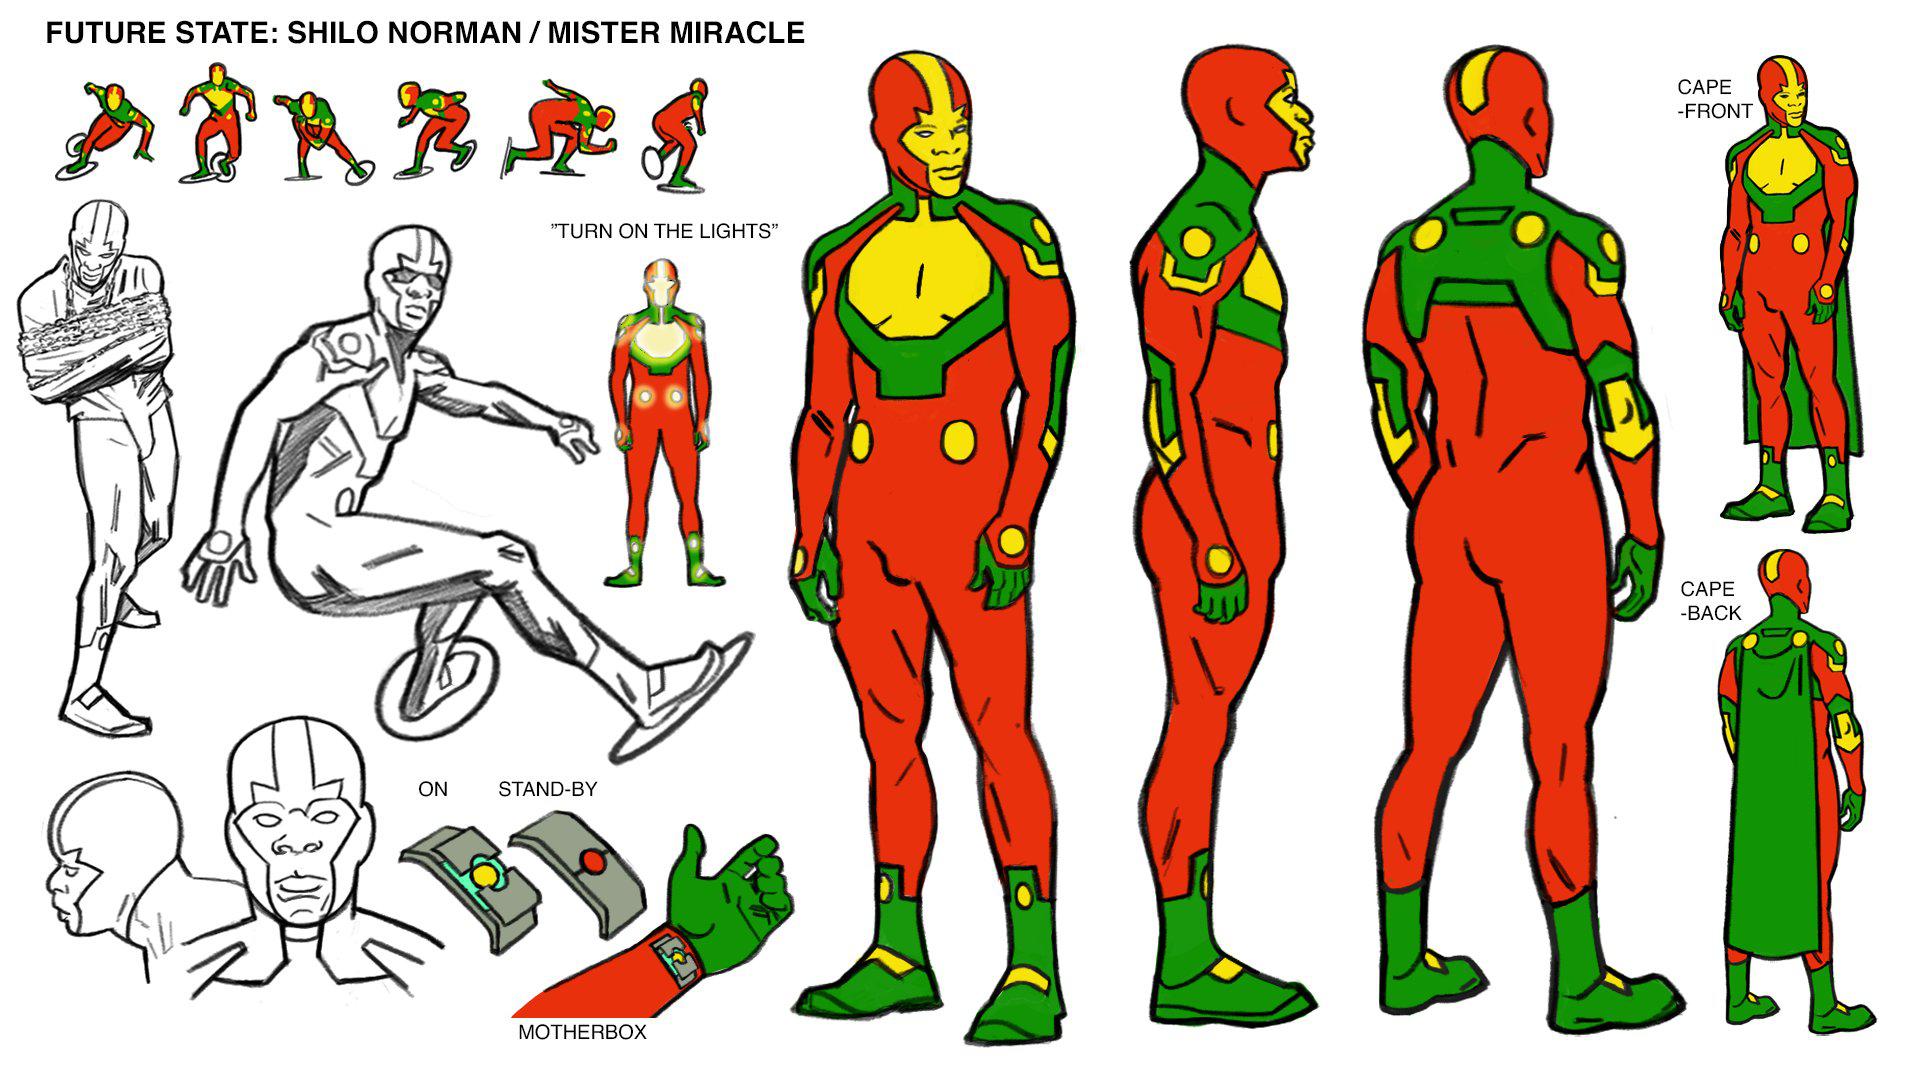 1920x1080 Future State: Mister Miracle (Shilo Norman) Character Design By V...